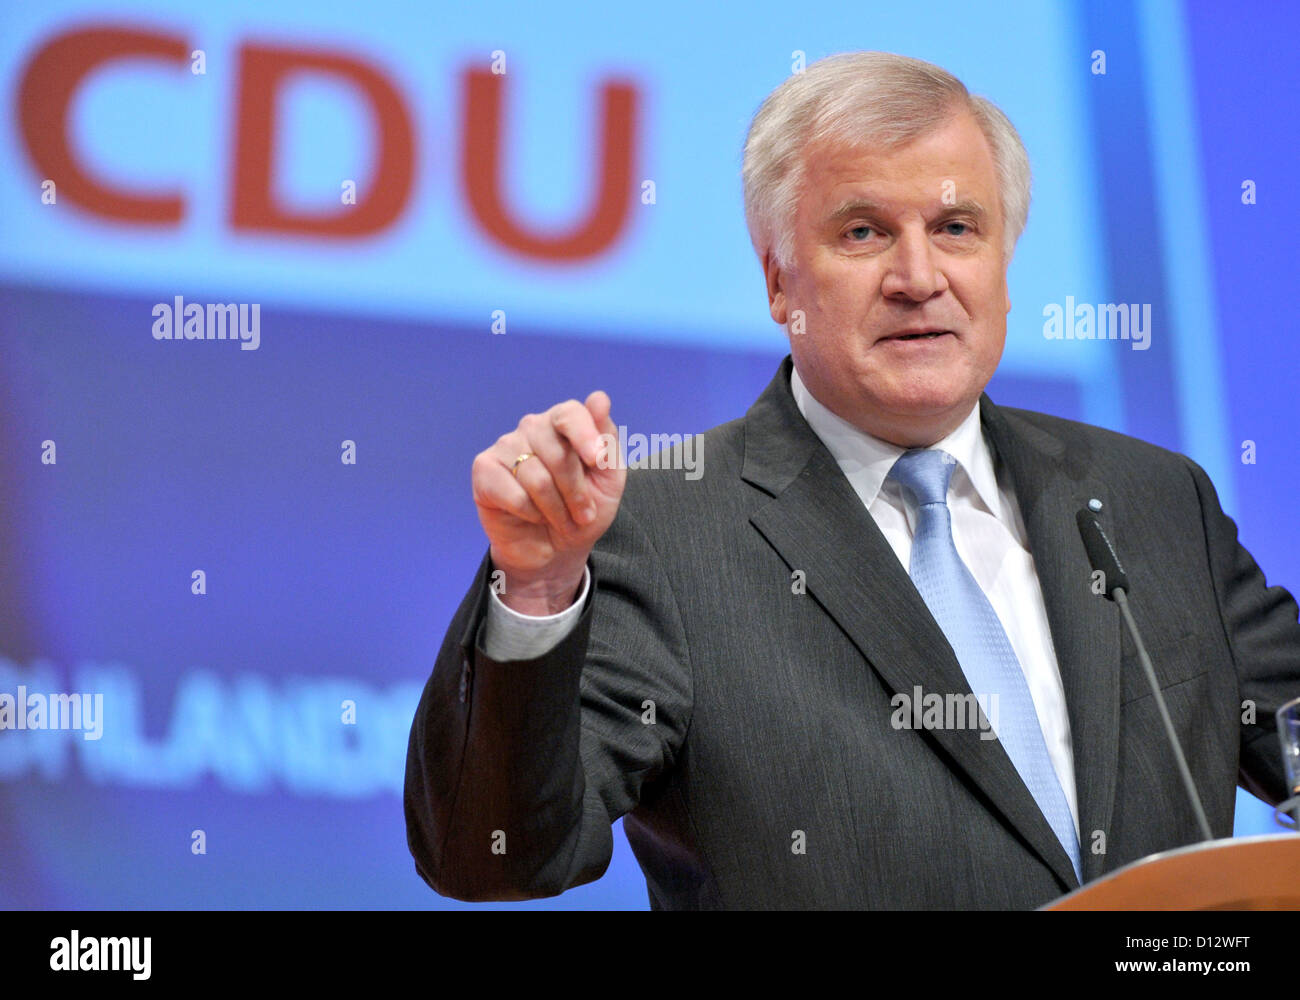 CSU chairman and Bavarian Premier Horst Seehofer speaks at the 25th Federal Party Convention of the Christian Democrats (CDU) in Hanover, Germany, 05 December 2012. PHOTO: BERND VON JUTRCZENKA Stock Photo